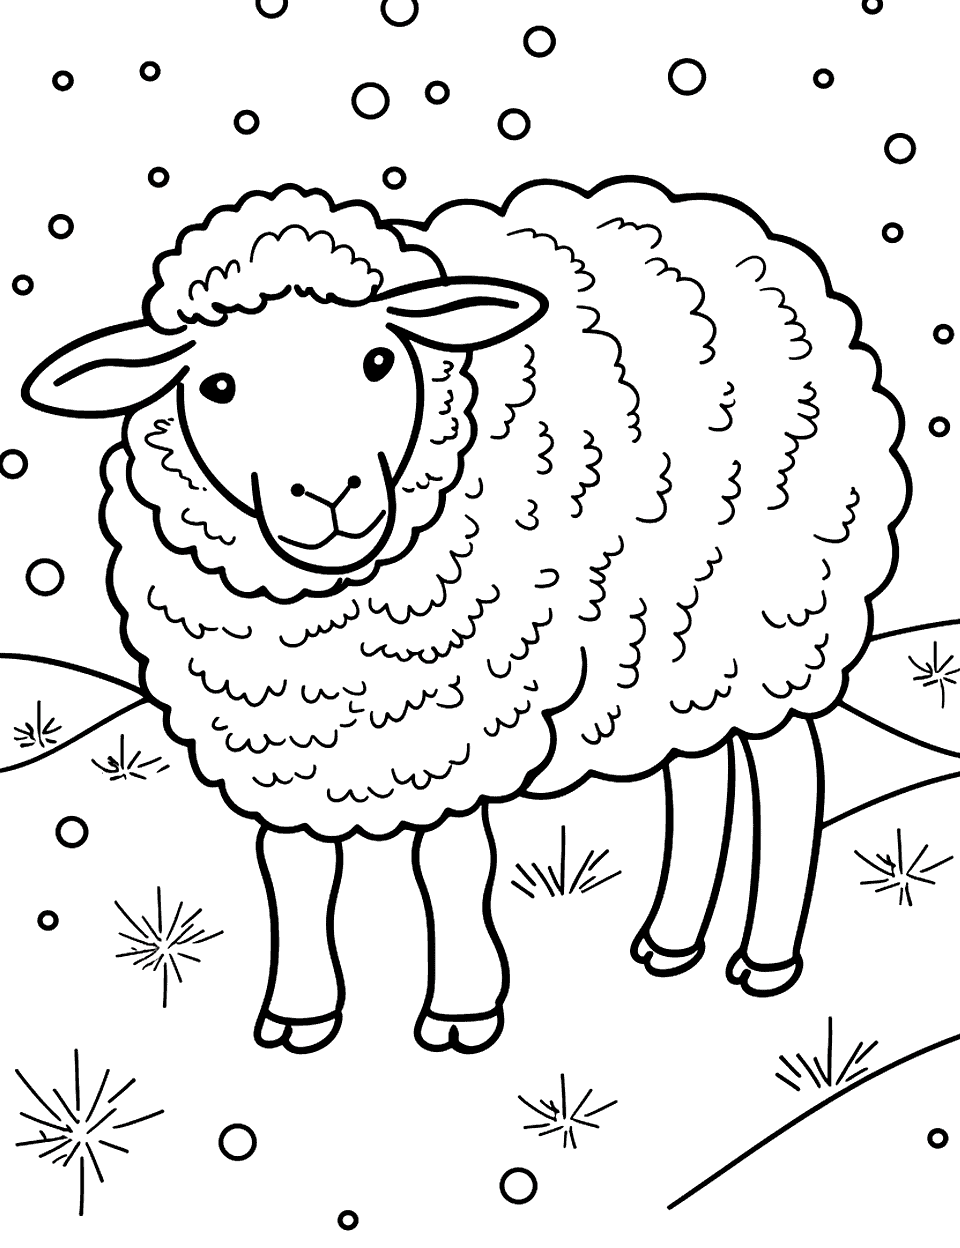 Sheep in Winter Wool Coloring Page - A sheep covered in thick wool, with snow gently falling around it.